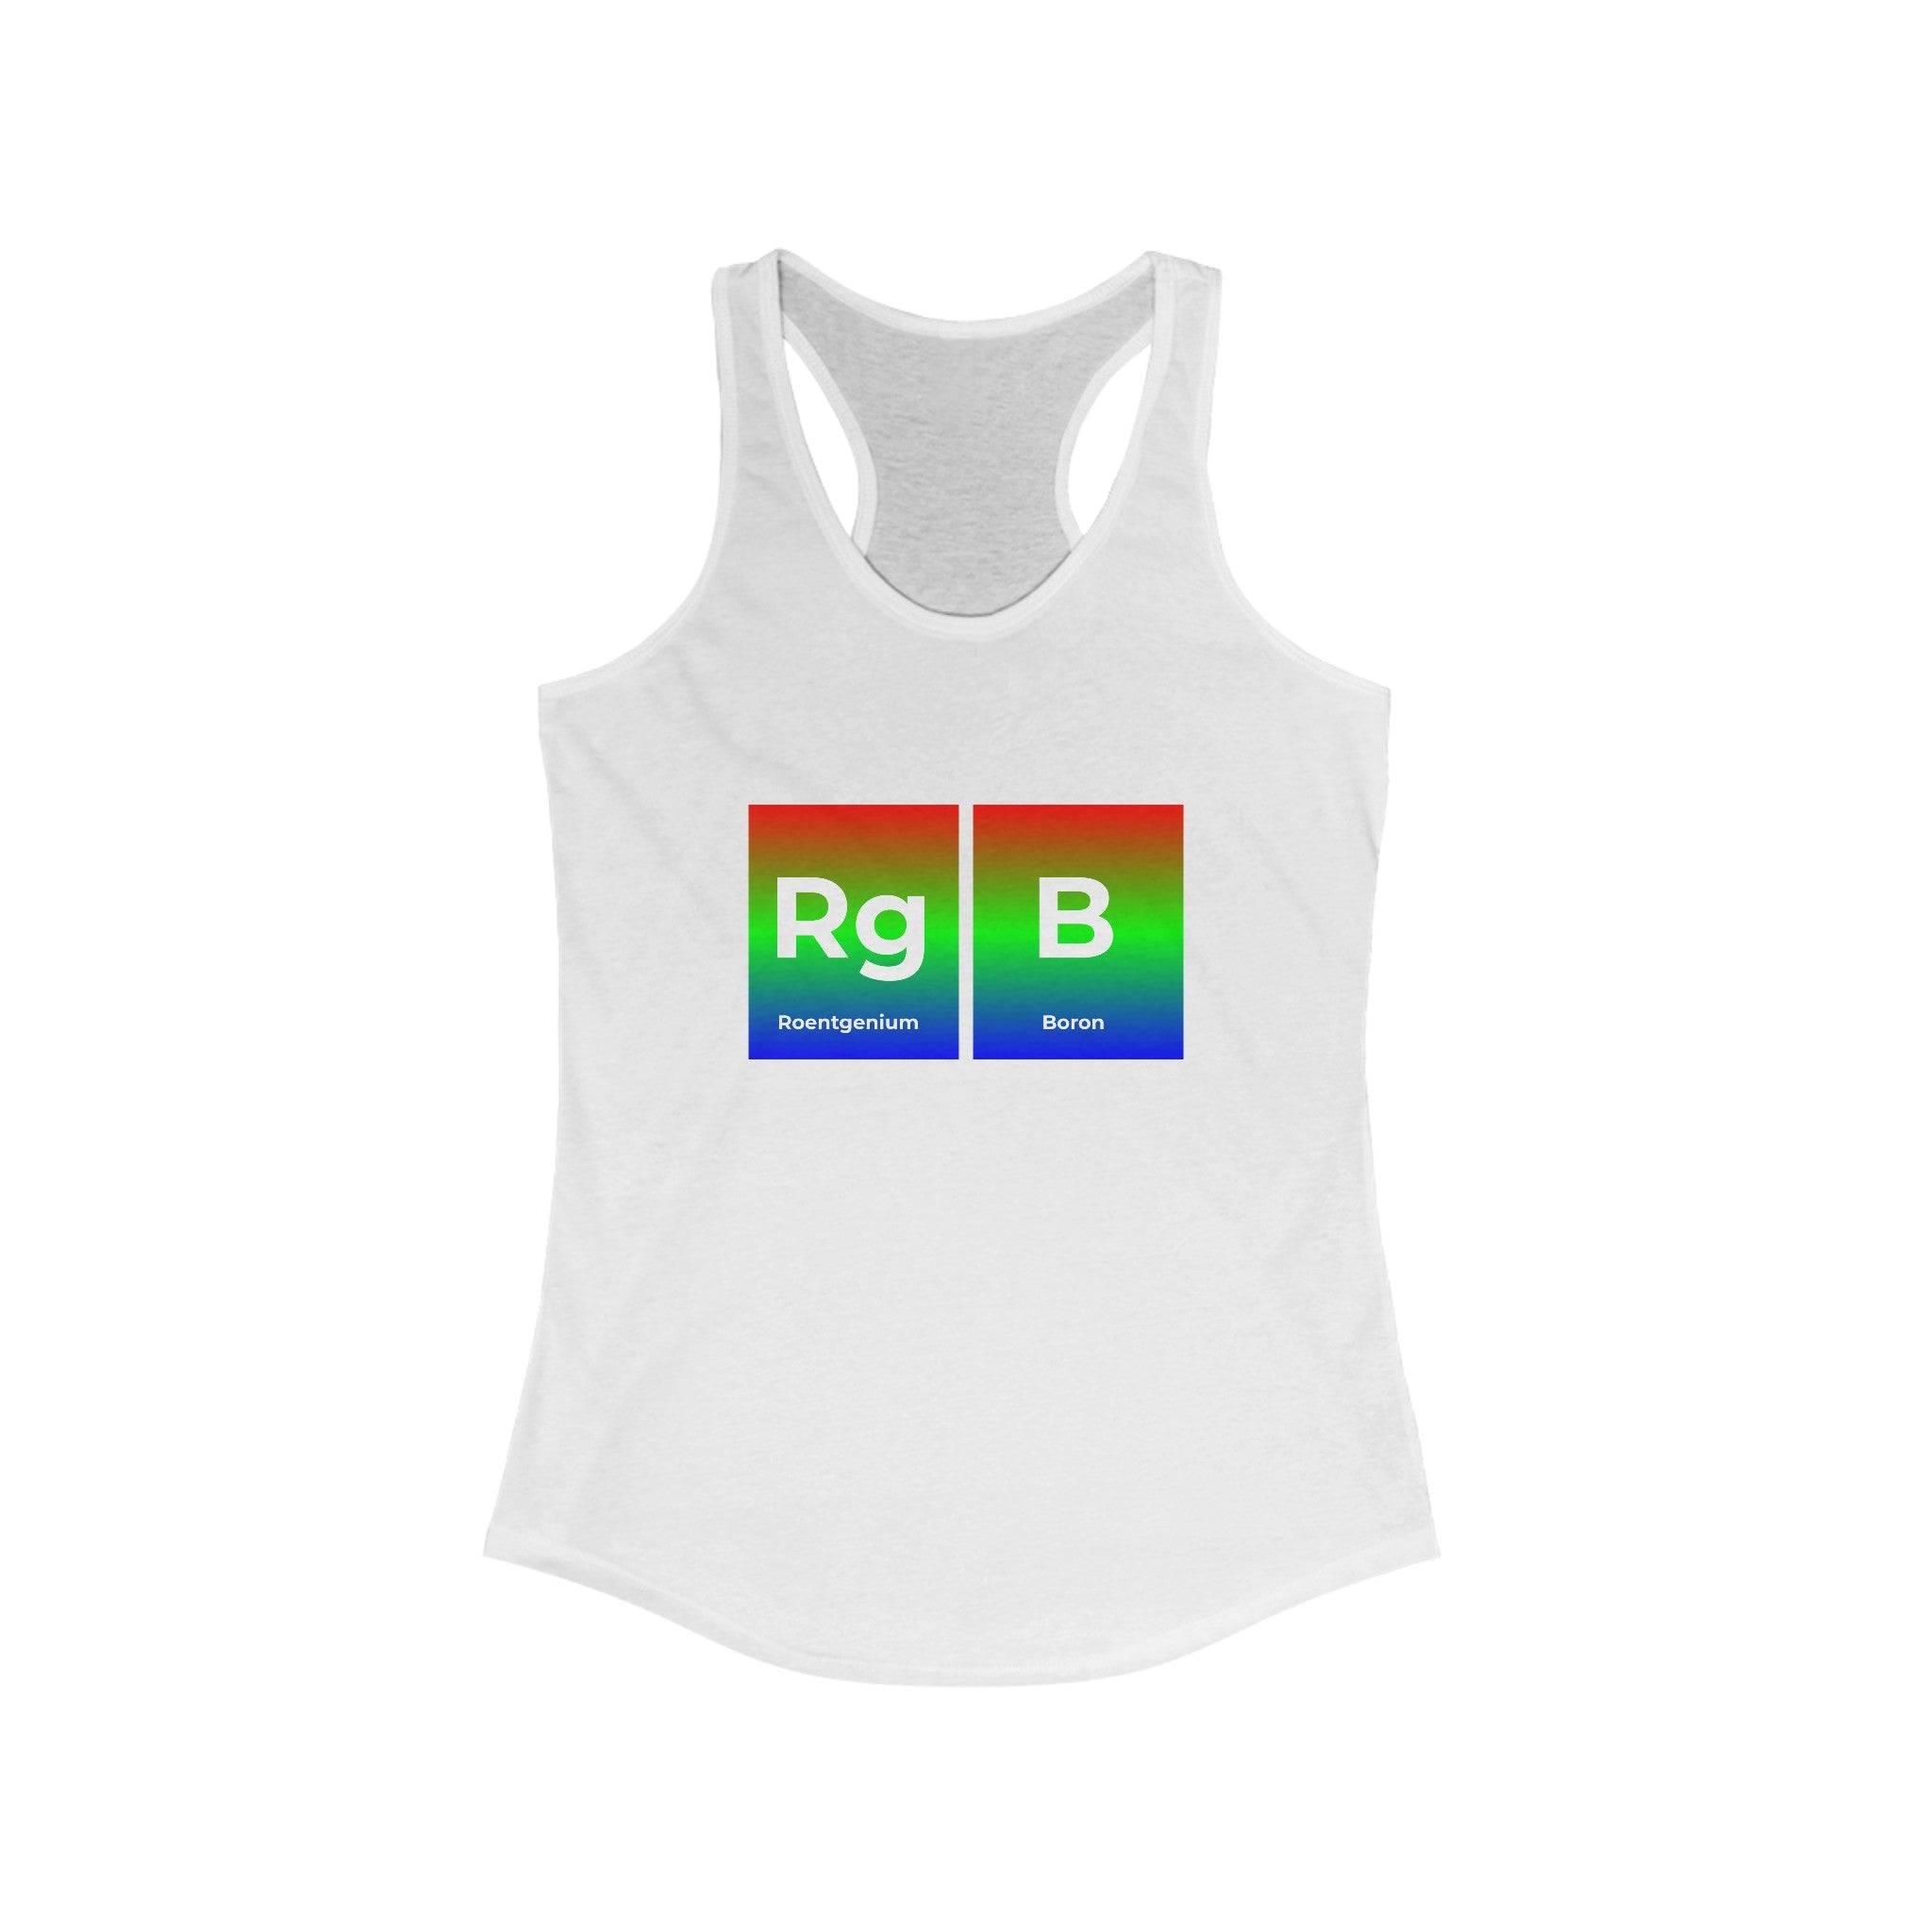 High-quality RG-B - Women's Racerback Tank featuring "Rg" representing roentgenium and "B" representing boron, colored in red, green, and blue to indicate the RGB color model. Ideal for an active lifestyle.